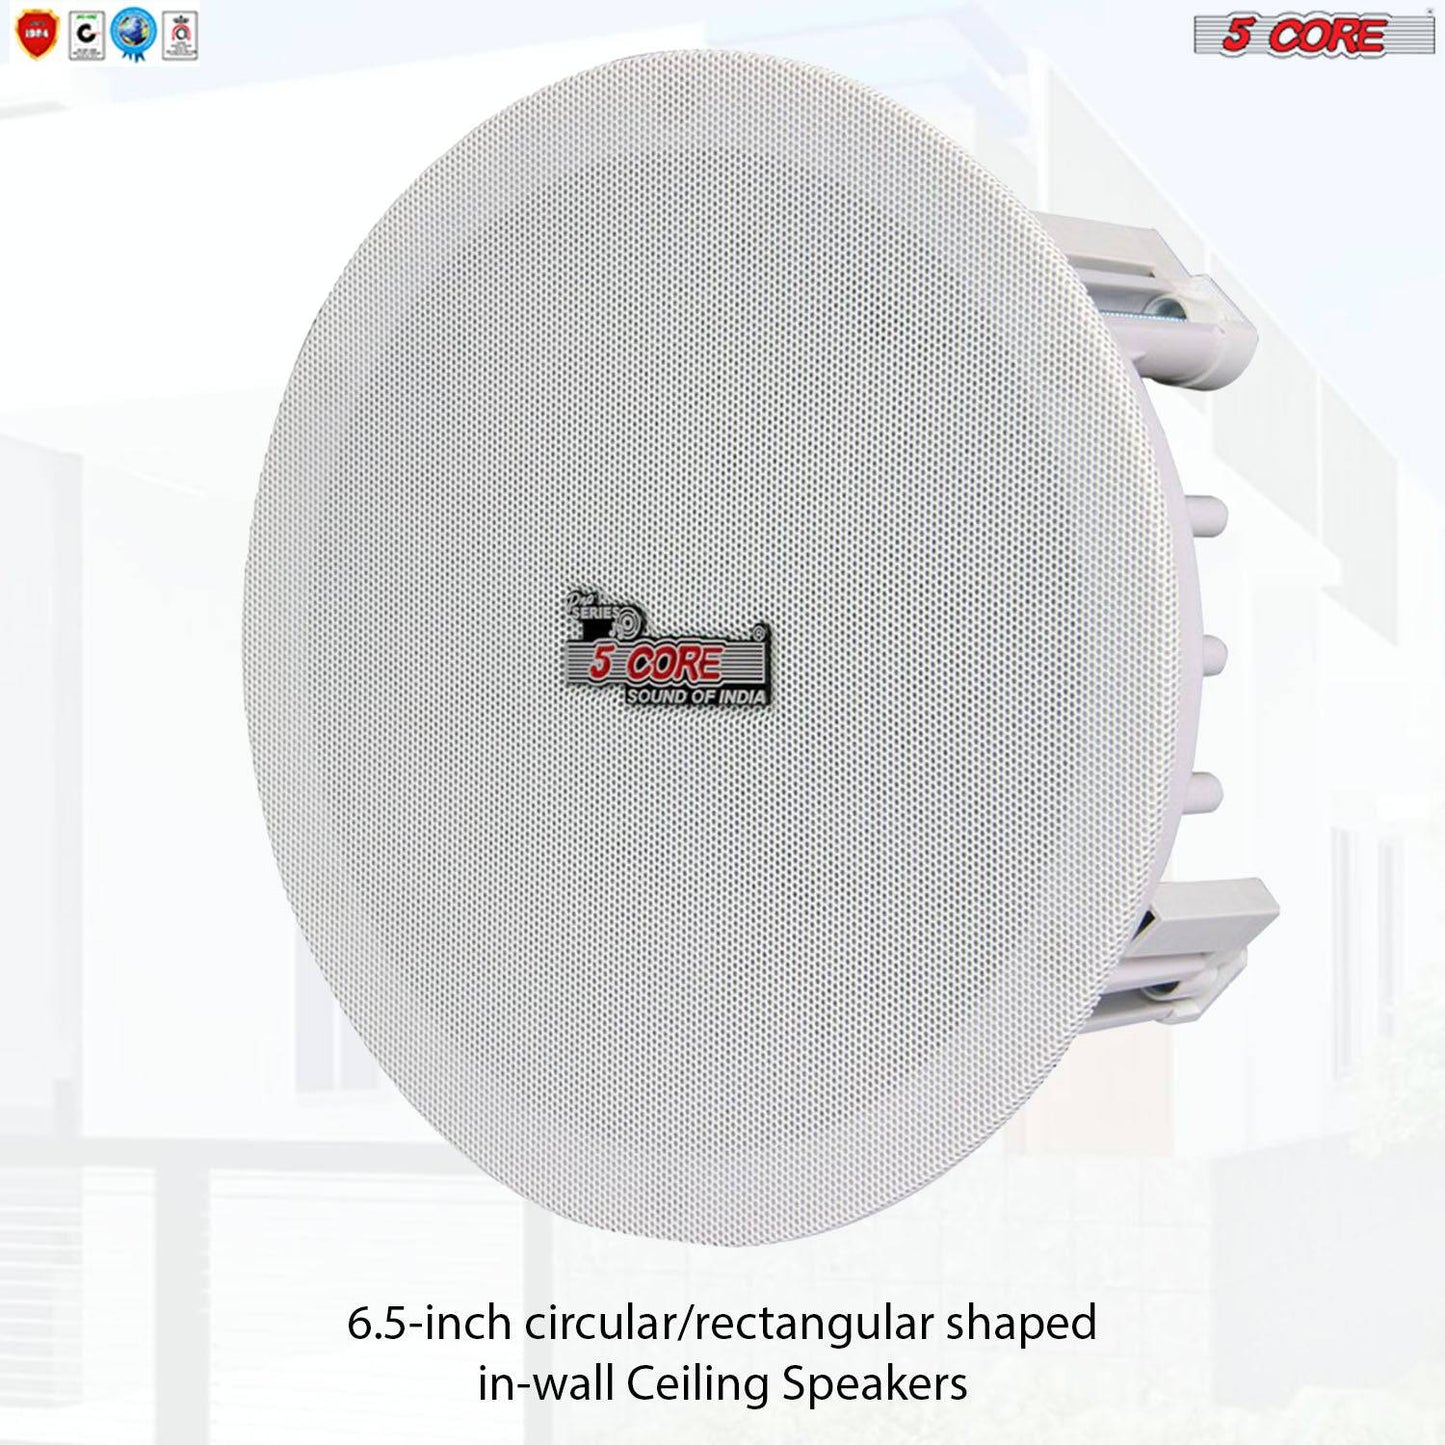 5Core 6 Pieces 6.5 Inch Ceiling Speaker Wired Waterproof in Ceiling/in Wall Mounted  CL 6.5-12 2W